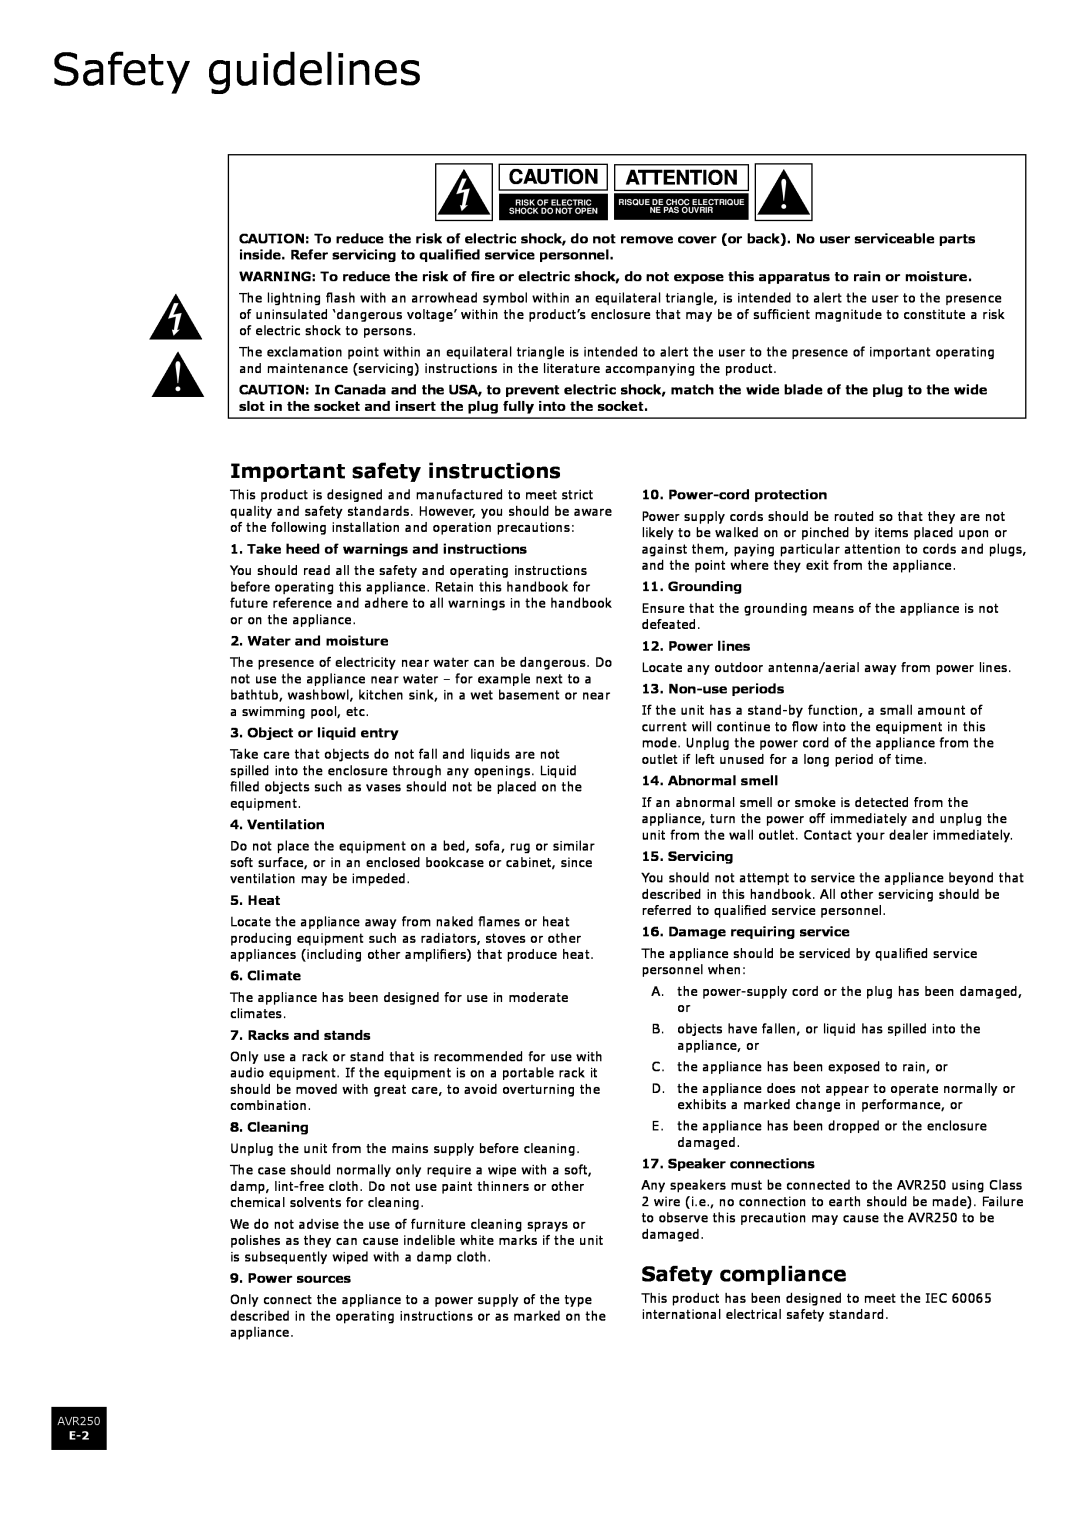 Arcam AVR250 Safety guidelines, Important safety instructions, Safety compliance, Caution Attention, Water and moisture 